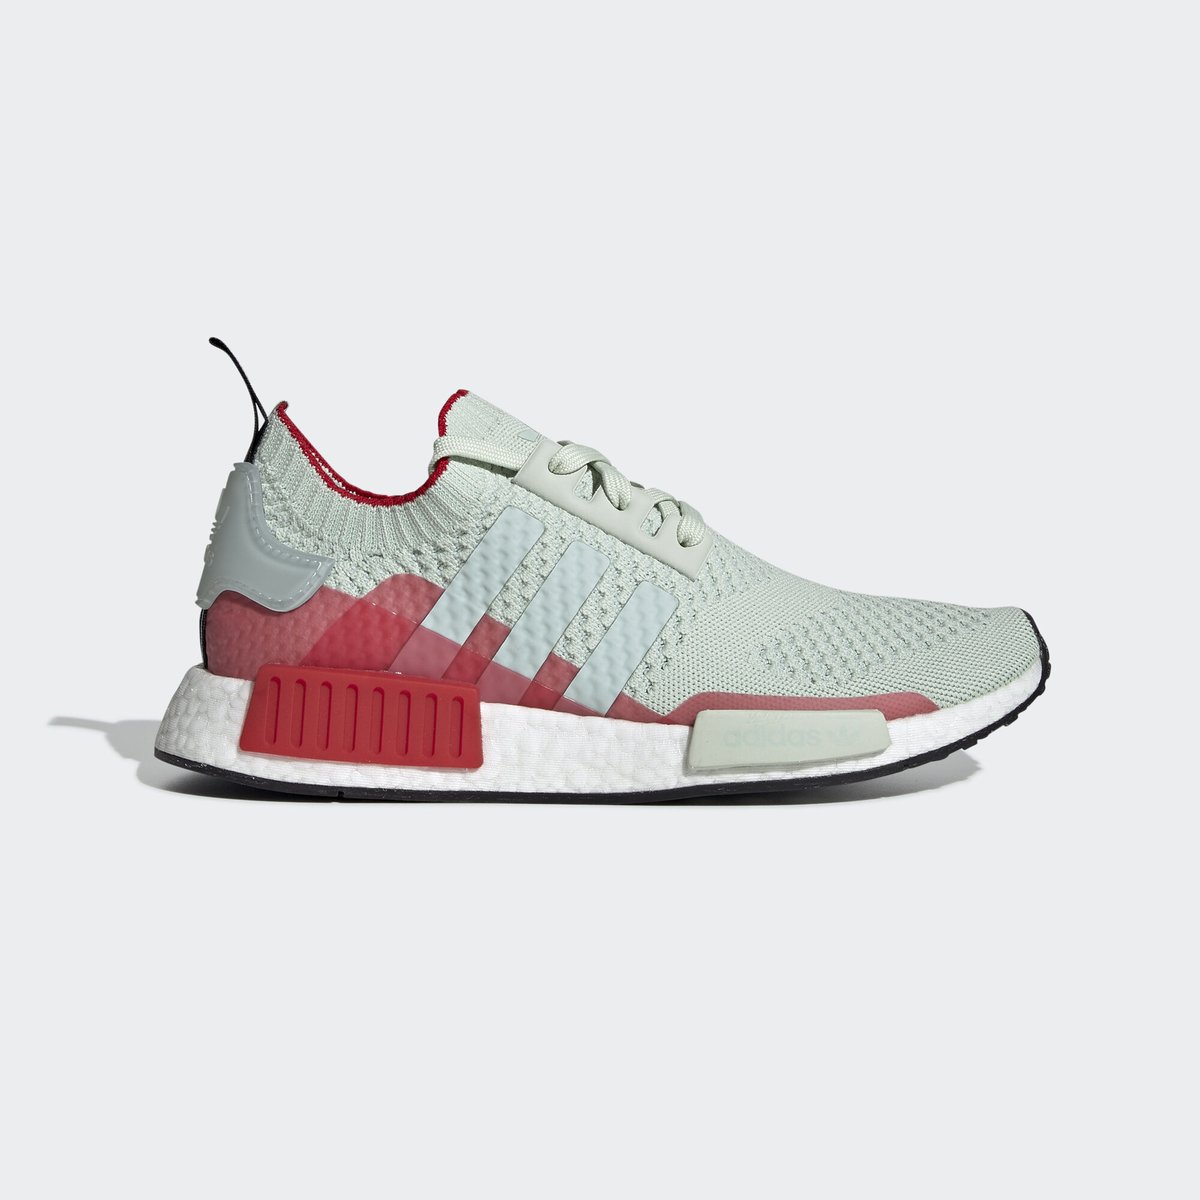 50% OFF on  #adidas US.adidas NMD_R1 Primeknit.Retail $170. Now $85 shipped.—>  https://bit.ly/2ZhxPTy   #ad